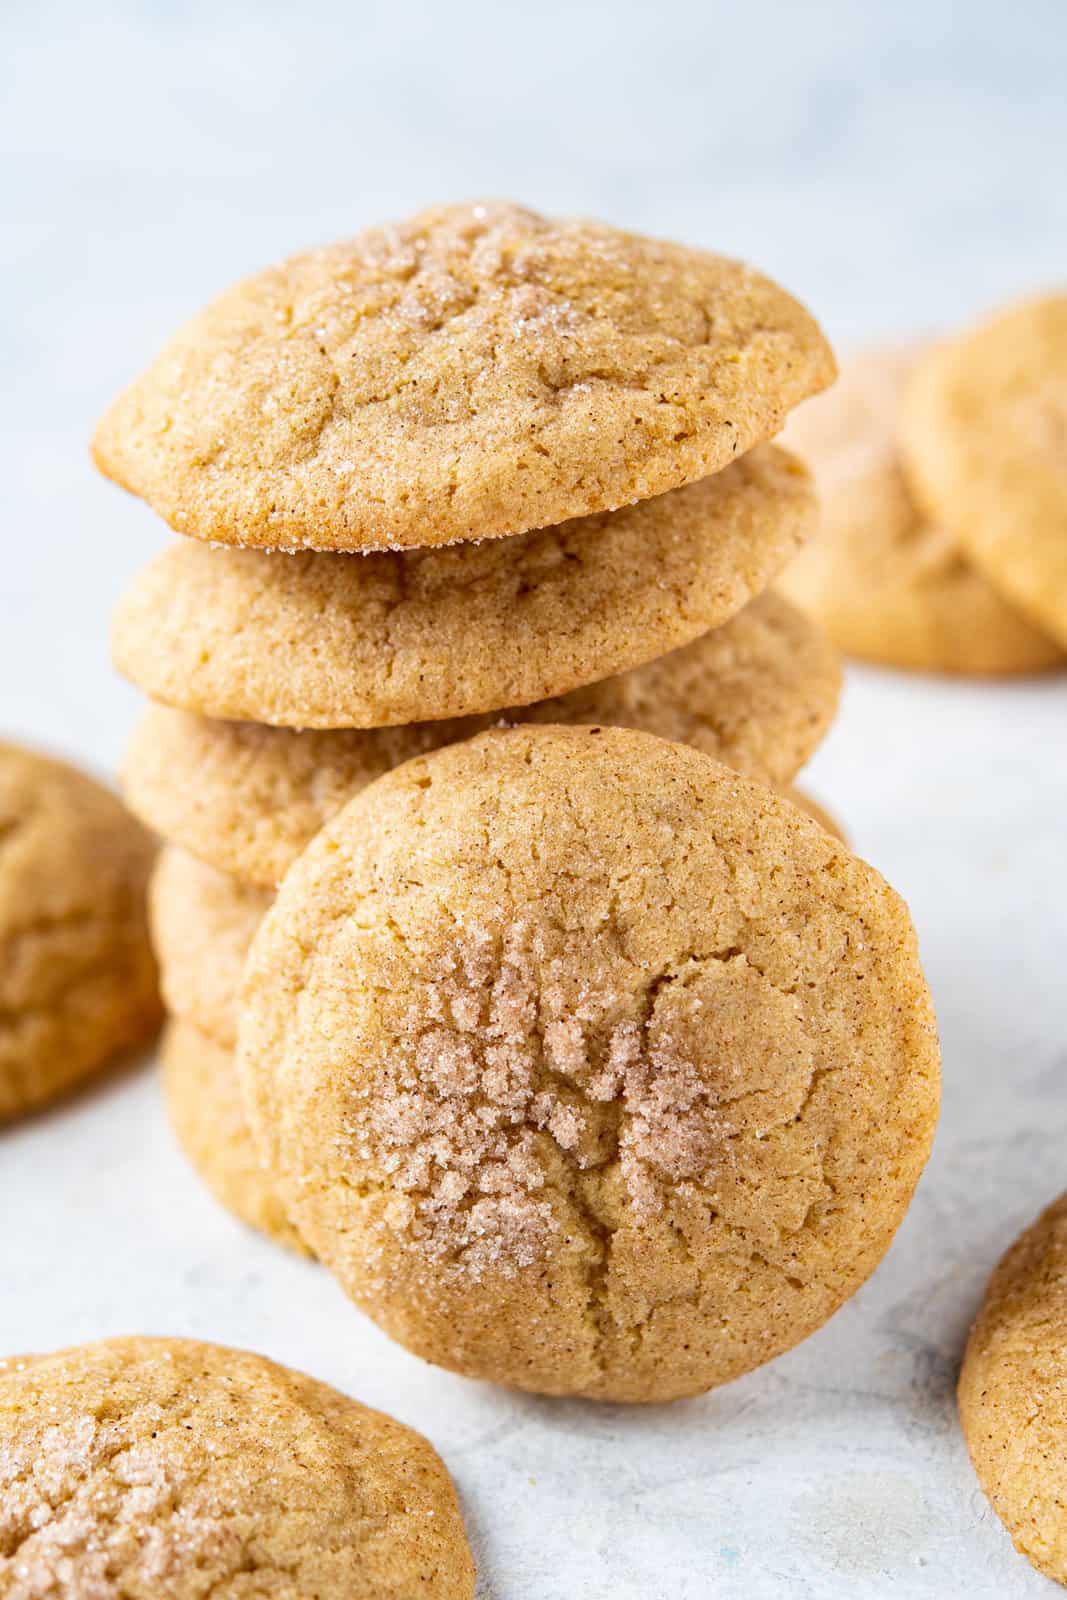 Chewy cinnamon cookies with cinnamon sugar on top arranged in a stack.